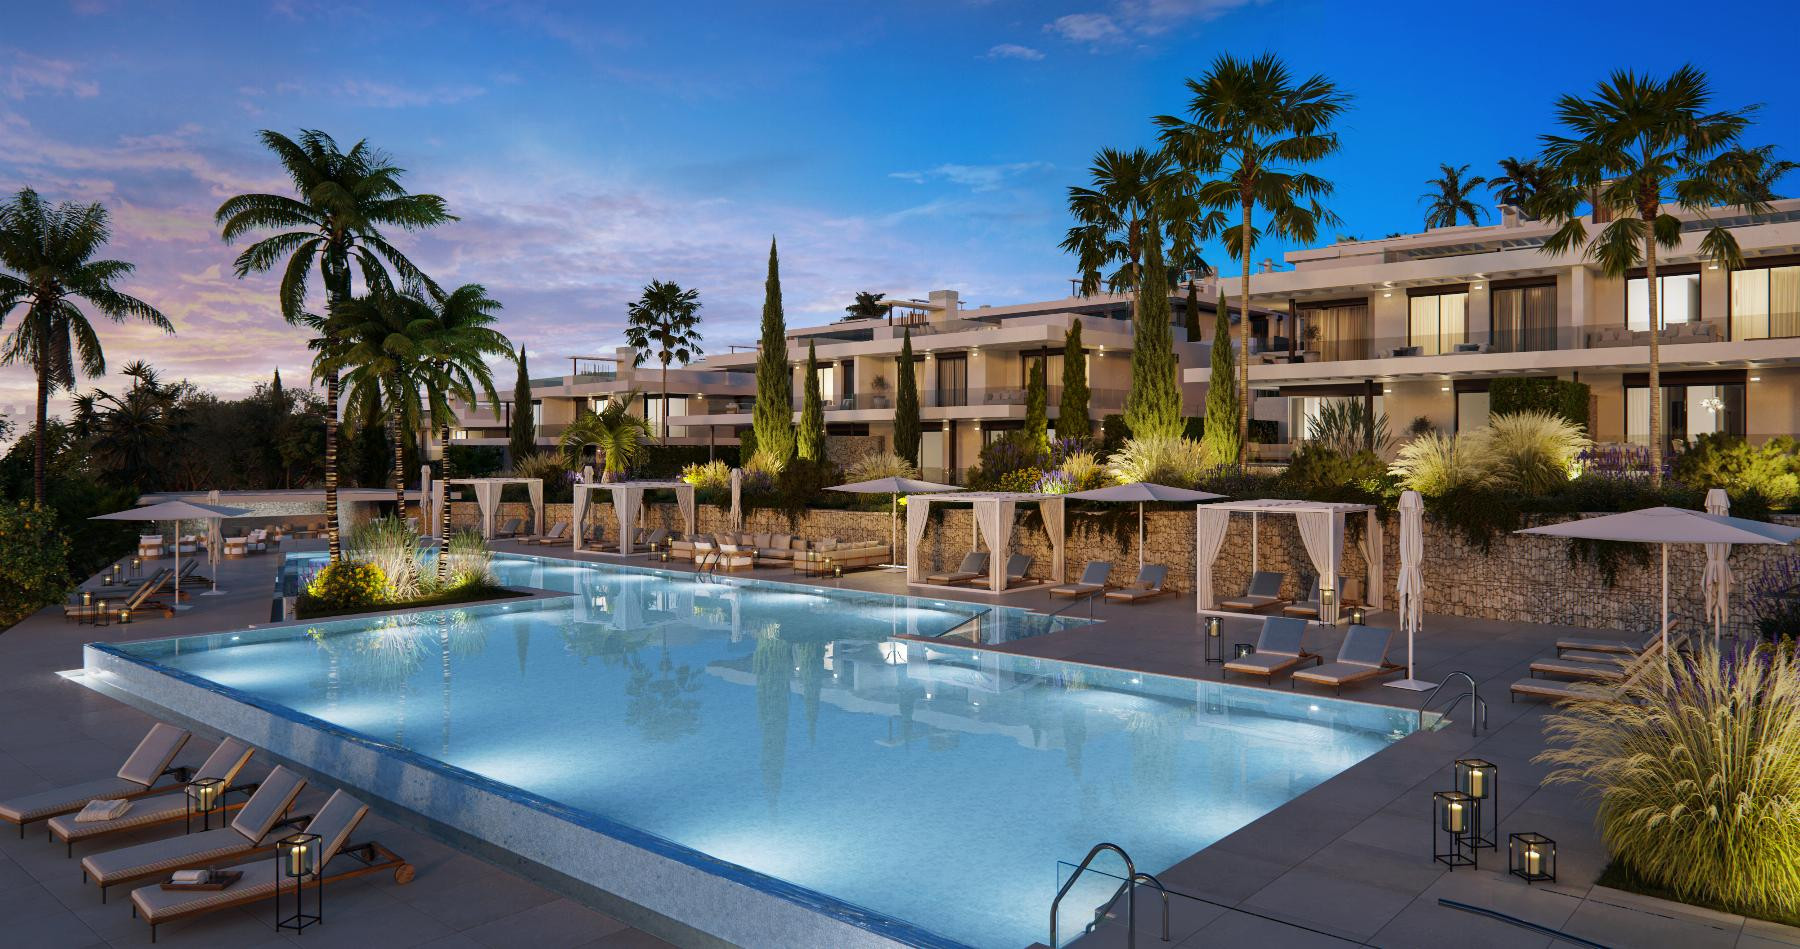 Stunning duplex penthouse in exclusive gated community 10 minutes from the center of Marbella and golf courses. | Image 1